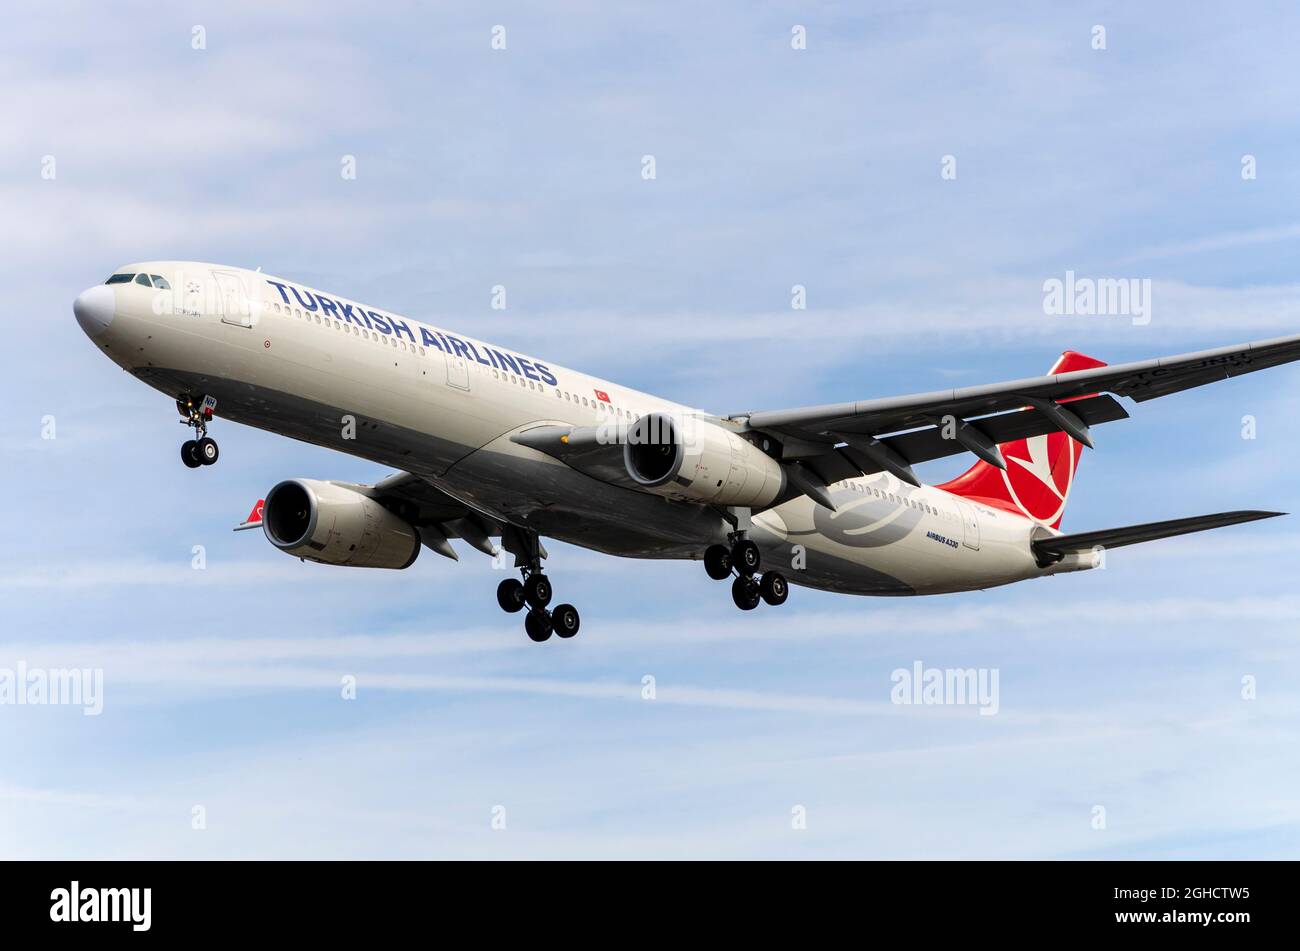 Turkish Airlines Airbus A330 jet airliner plane TC-JNH landing at London Heathrow Airport, UK. Flag carrier airline of Turkey. Airplane on finals Stock Photo